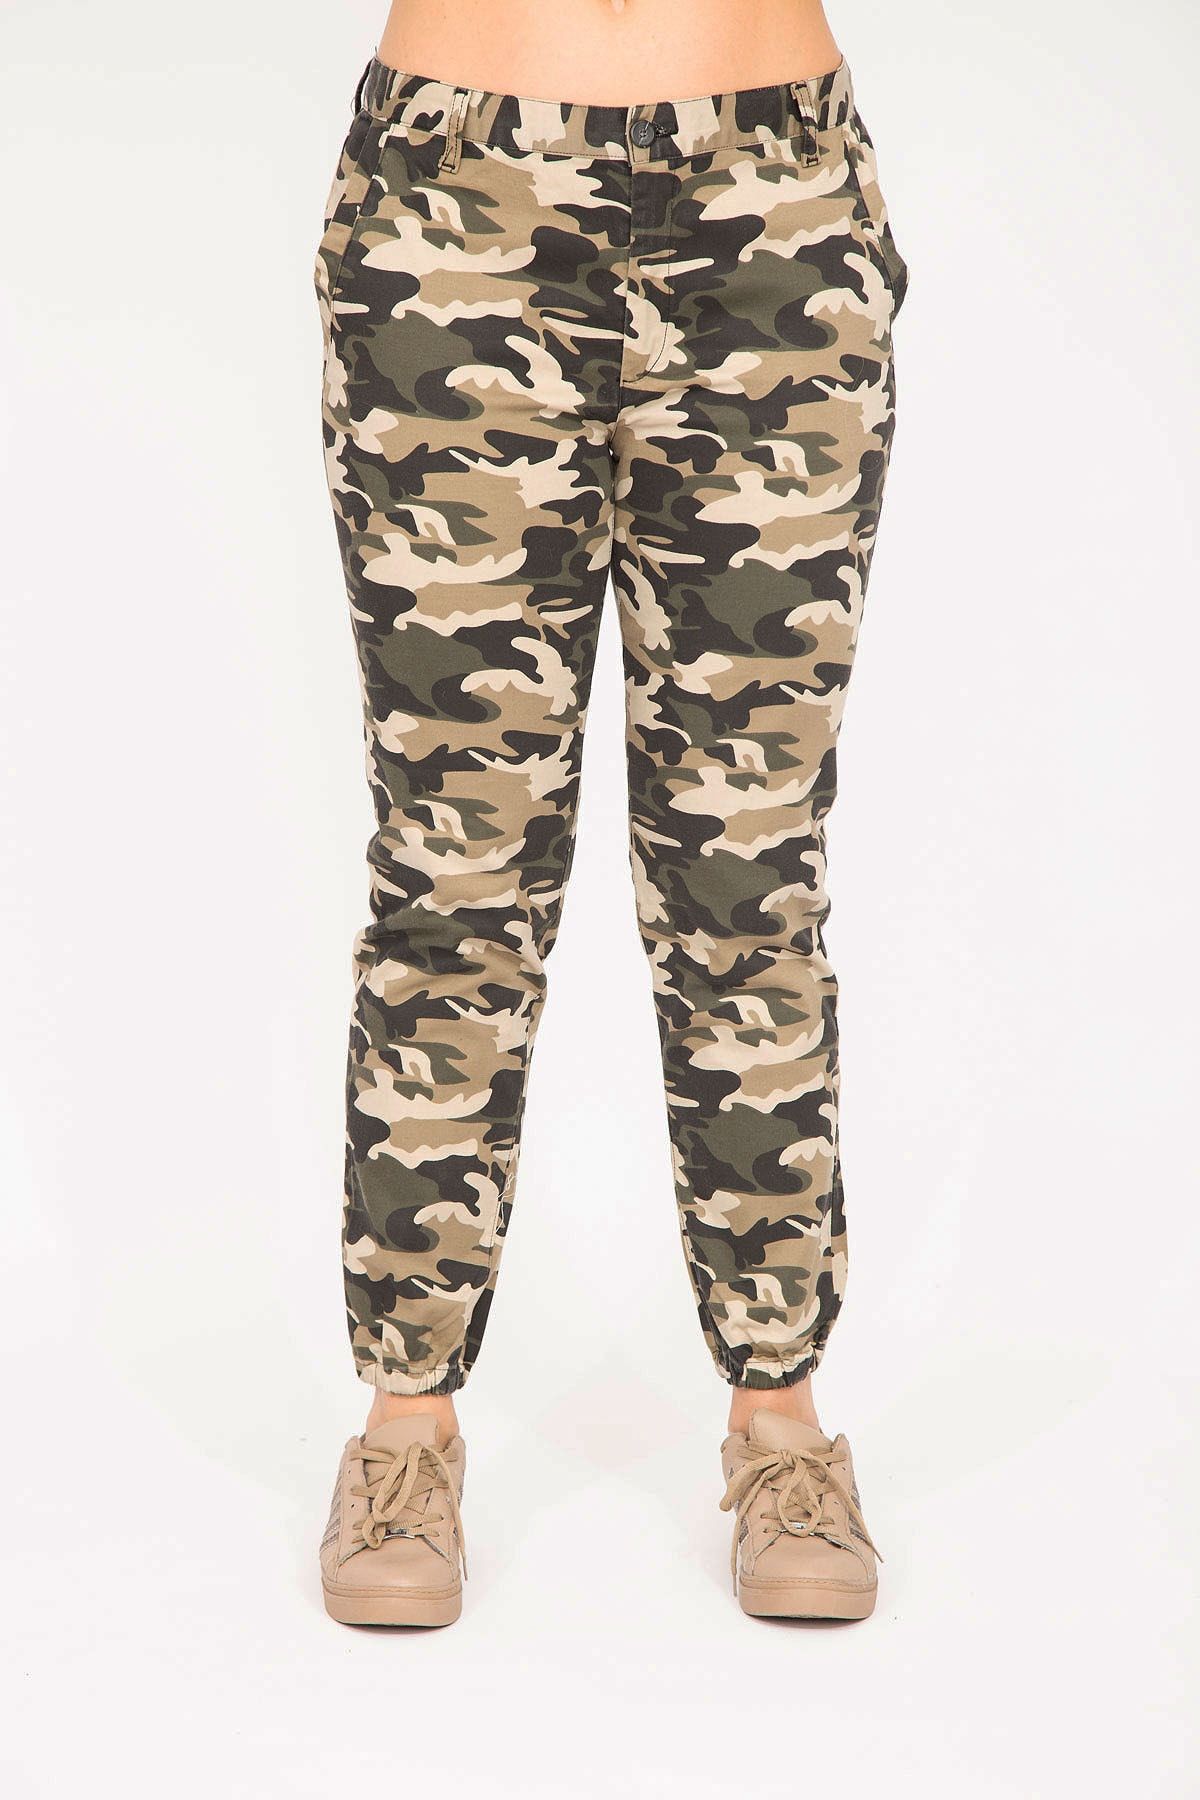 Camouflage Printed Cotton Combat Trousers - White/Multi - Just $7